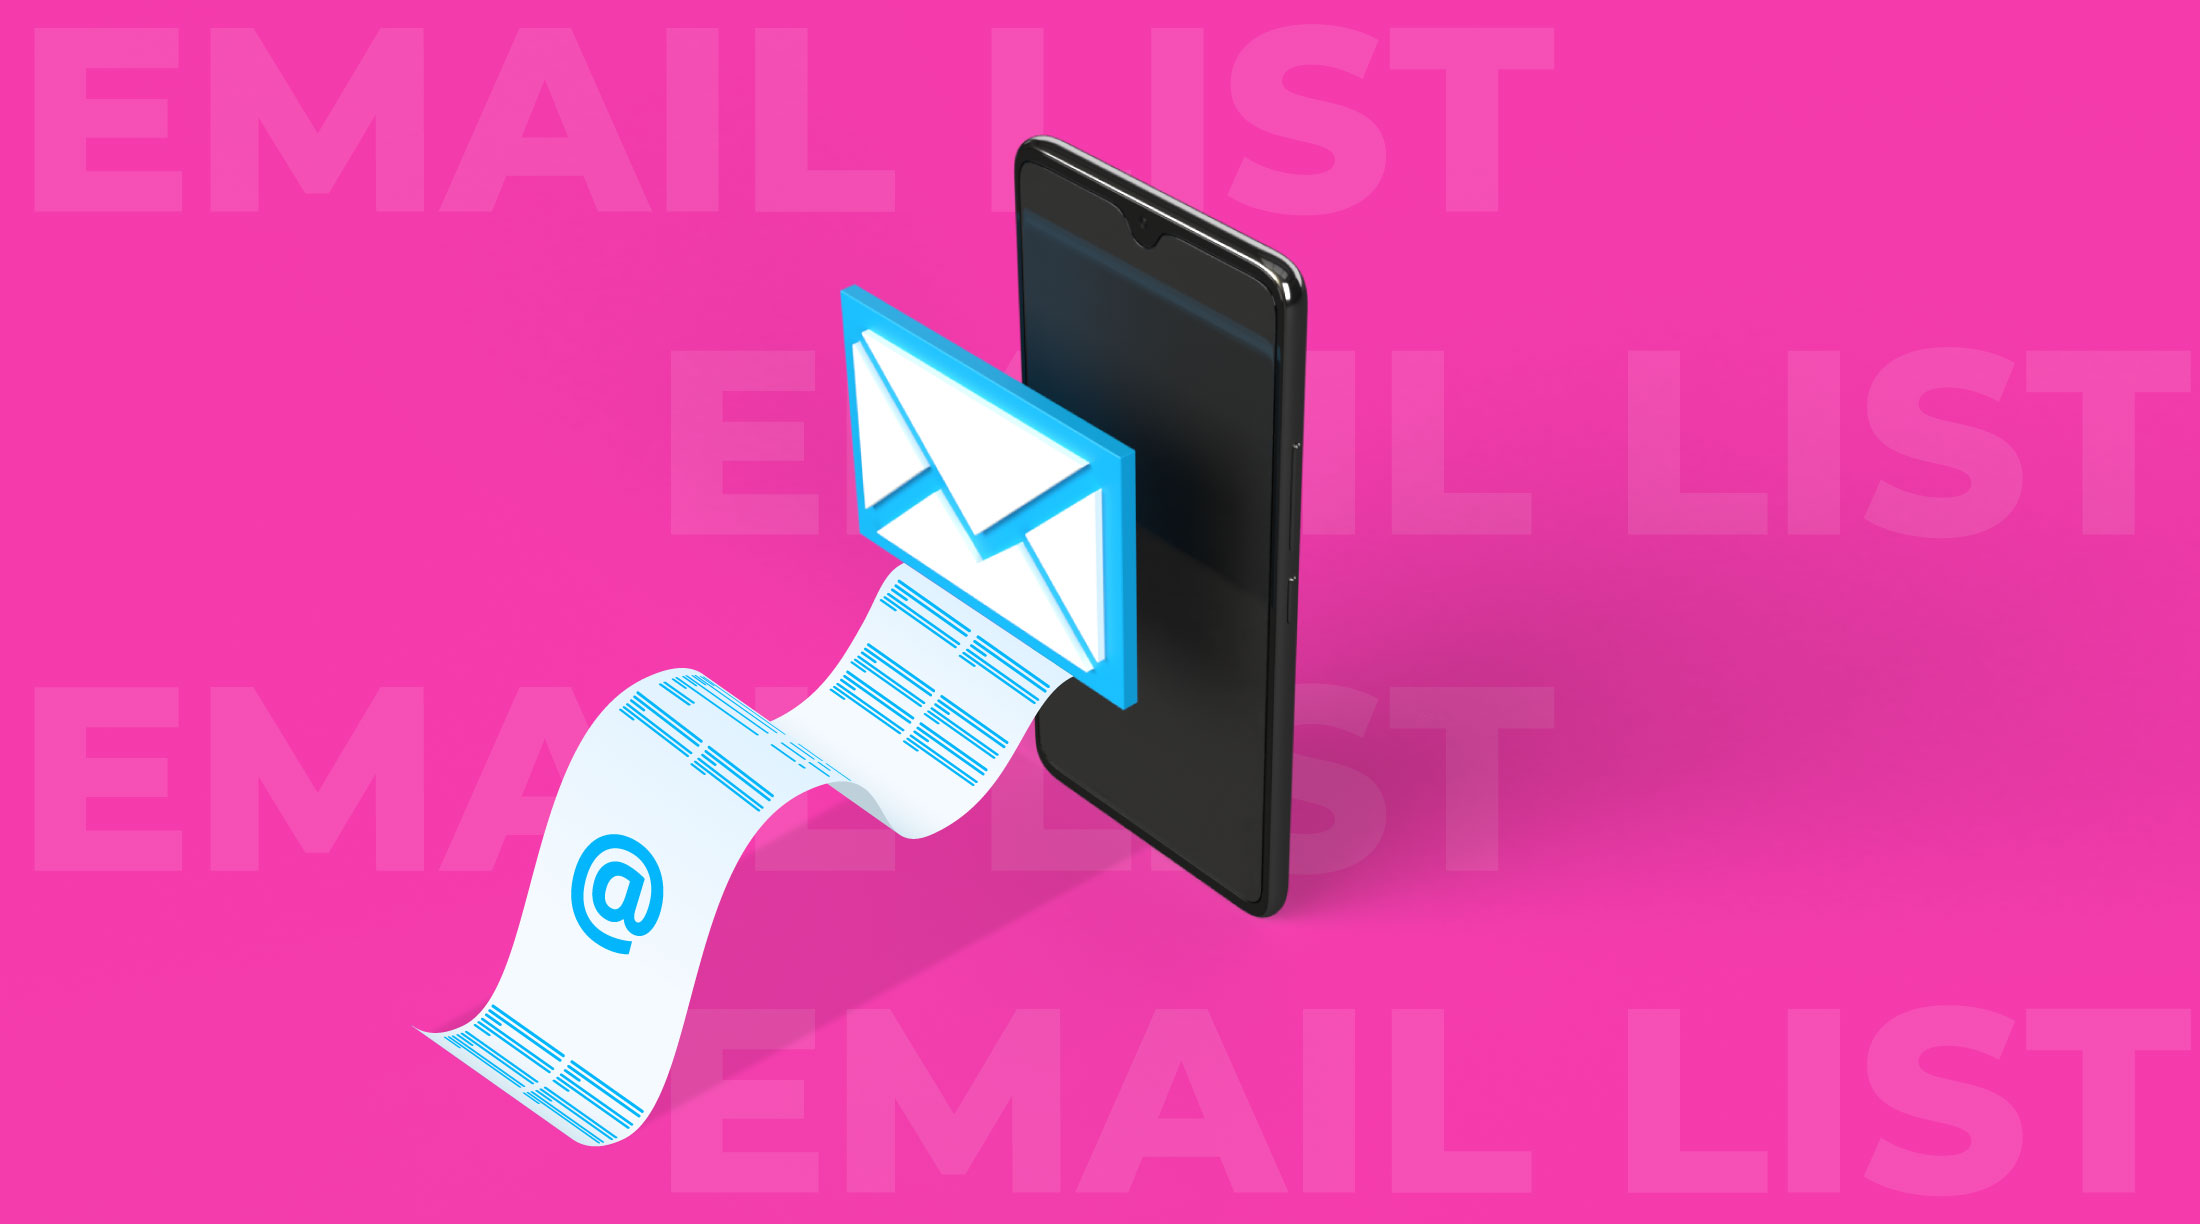 6 reasons to buy email lists (and you won’t like them!)